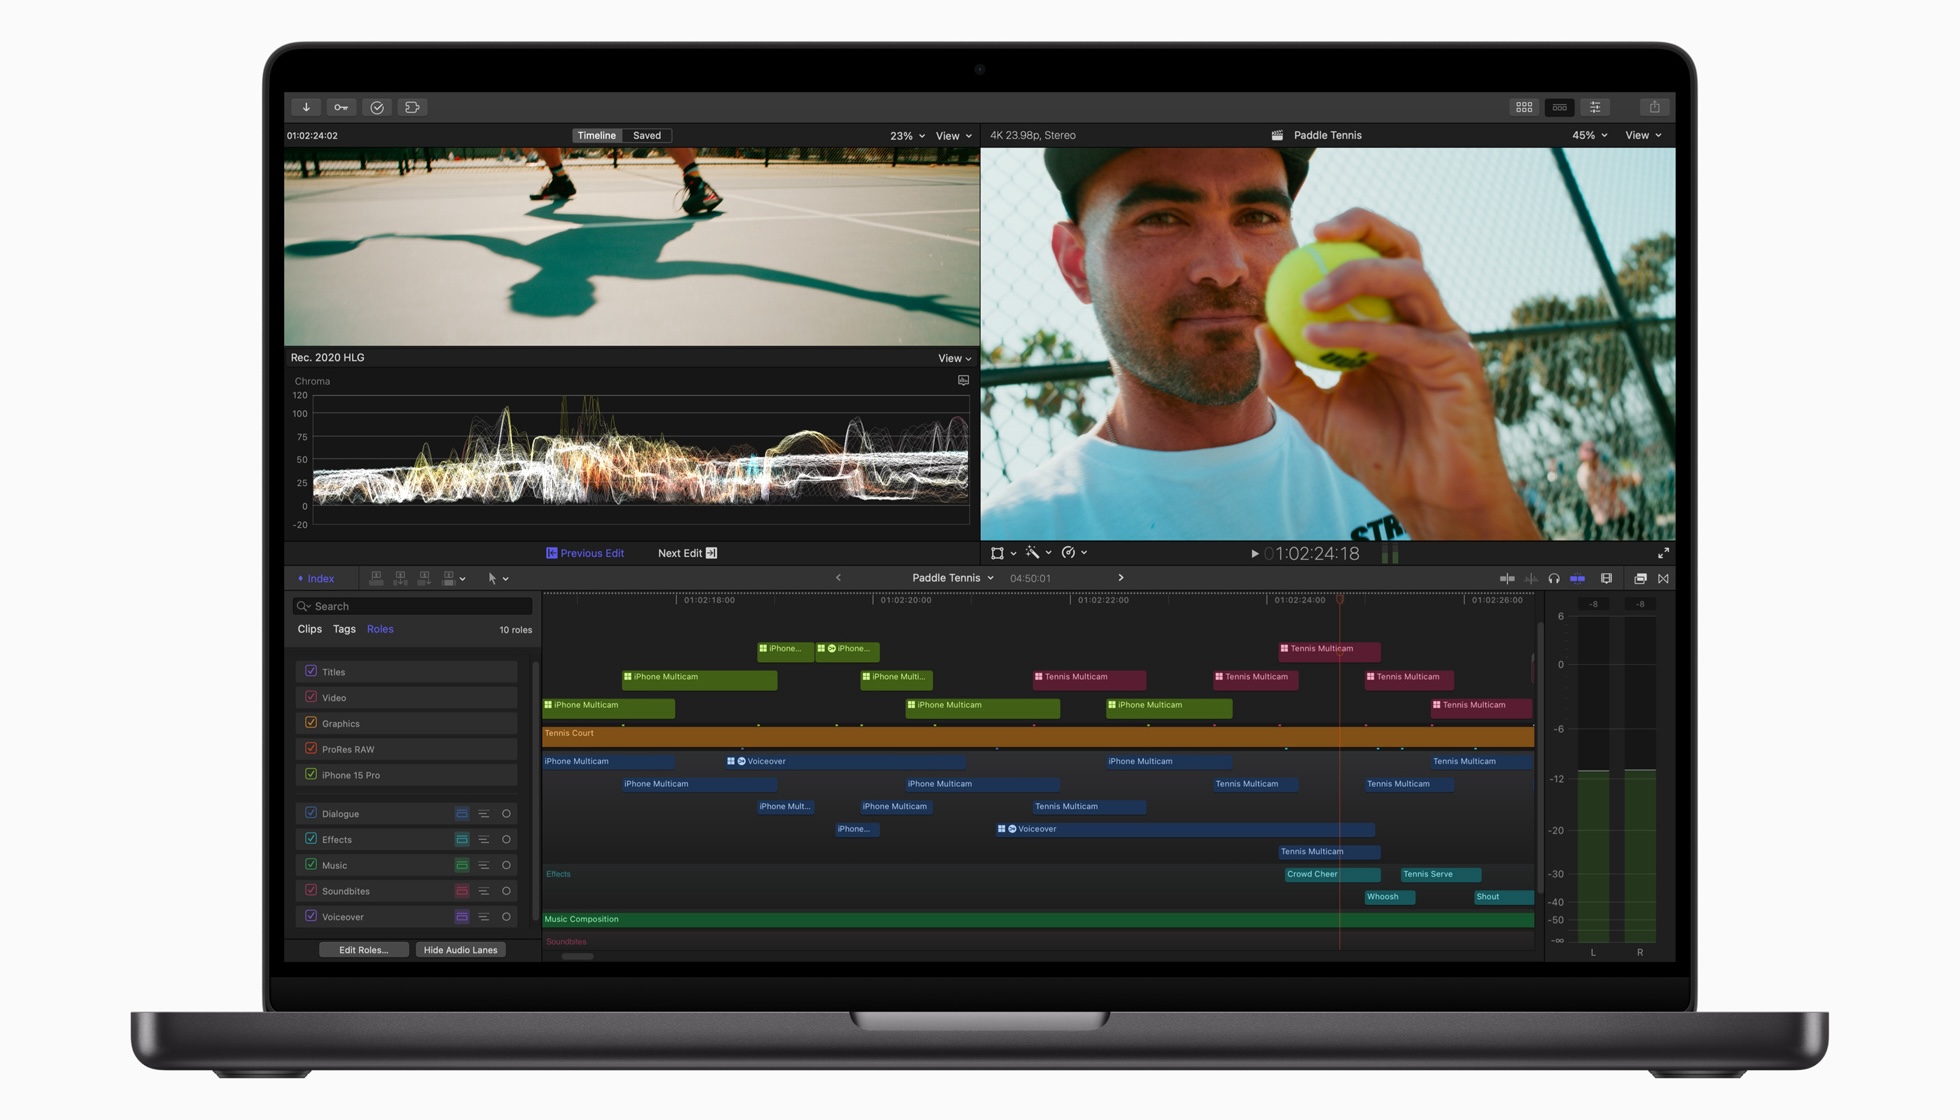 New roles editor in Final Cut Pro 10.7